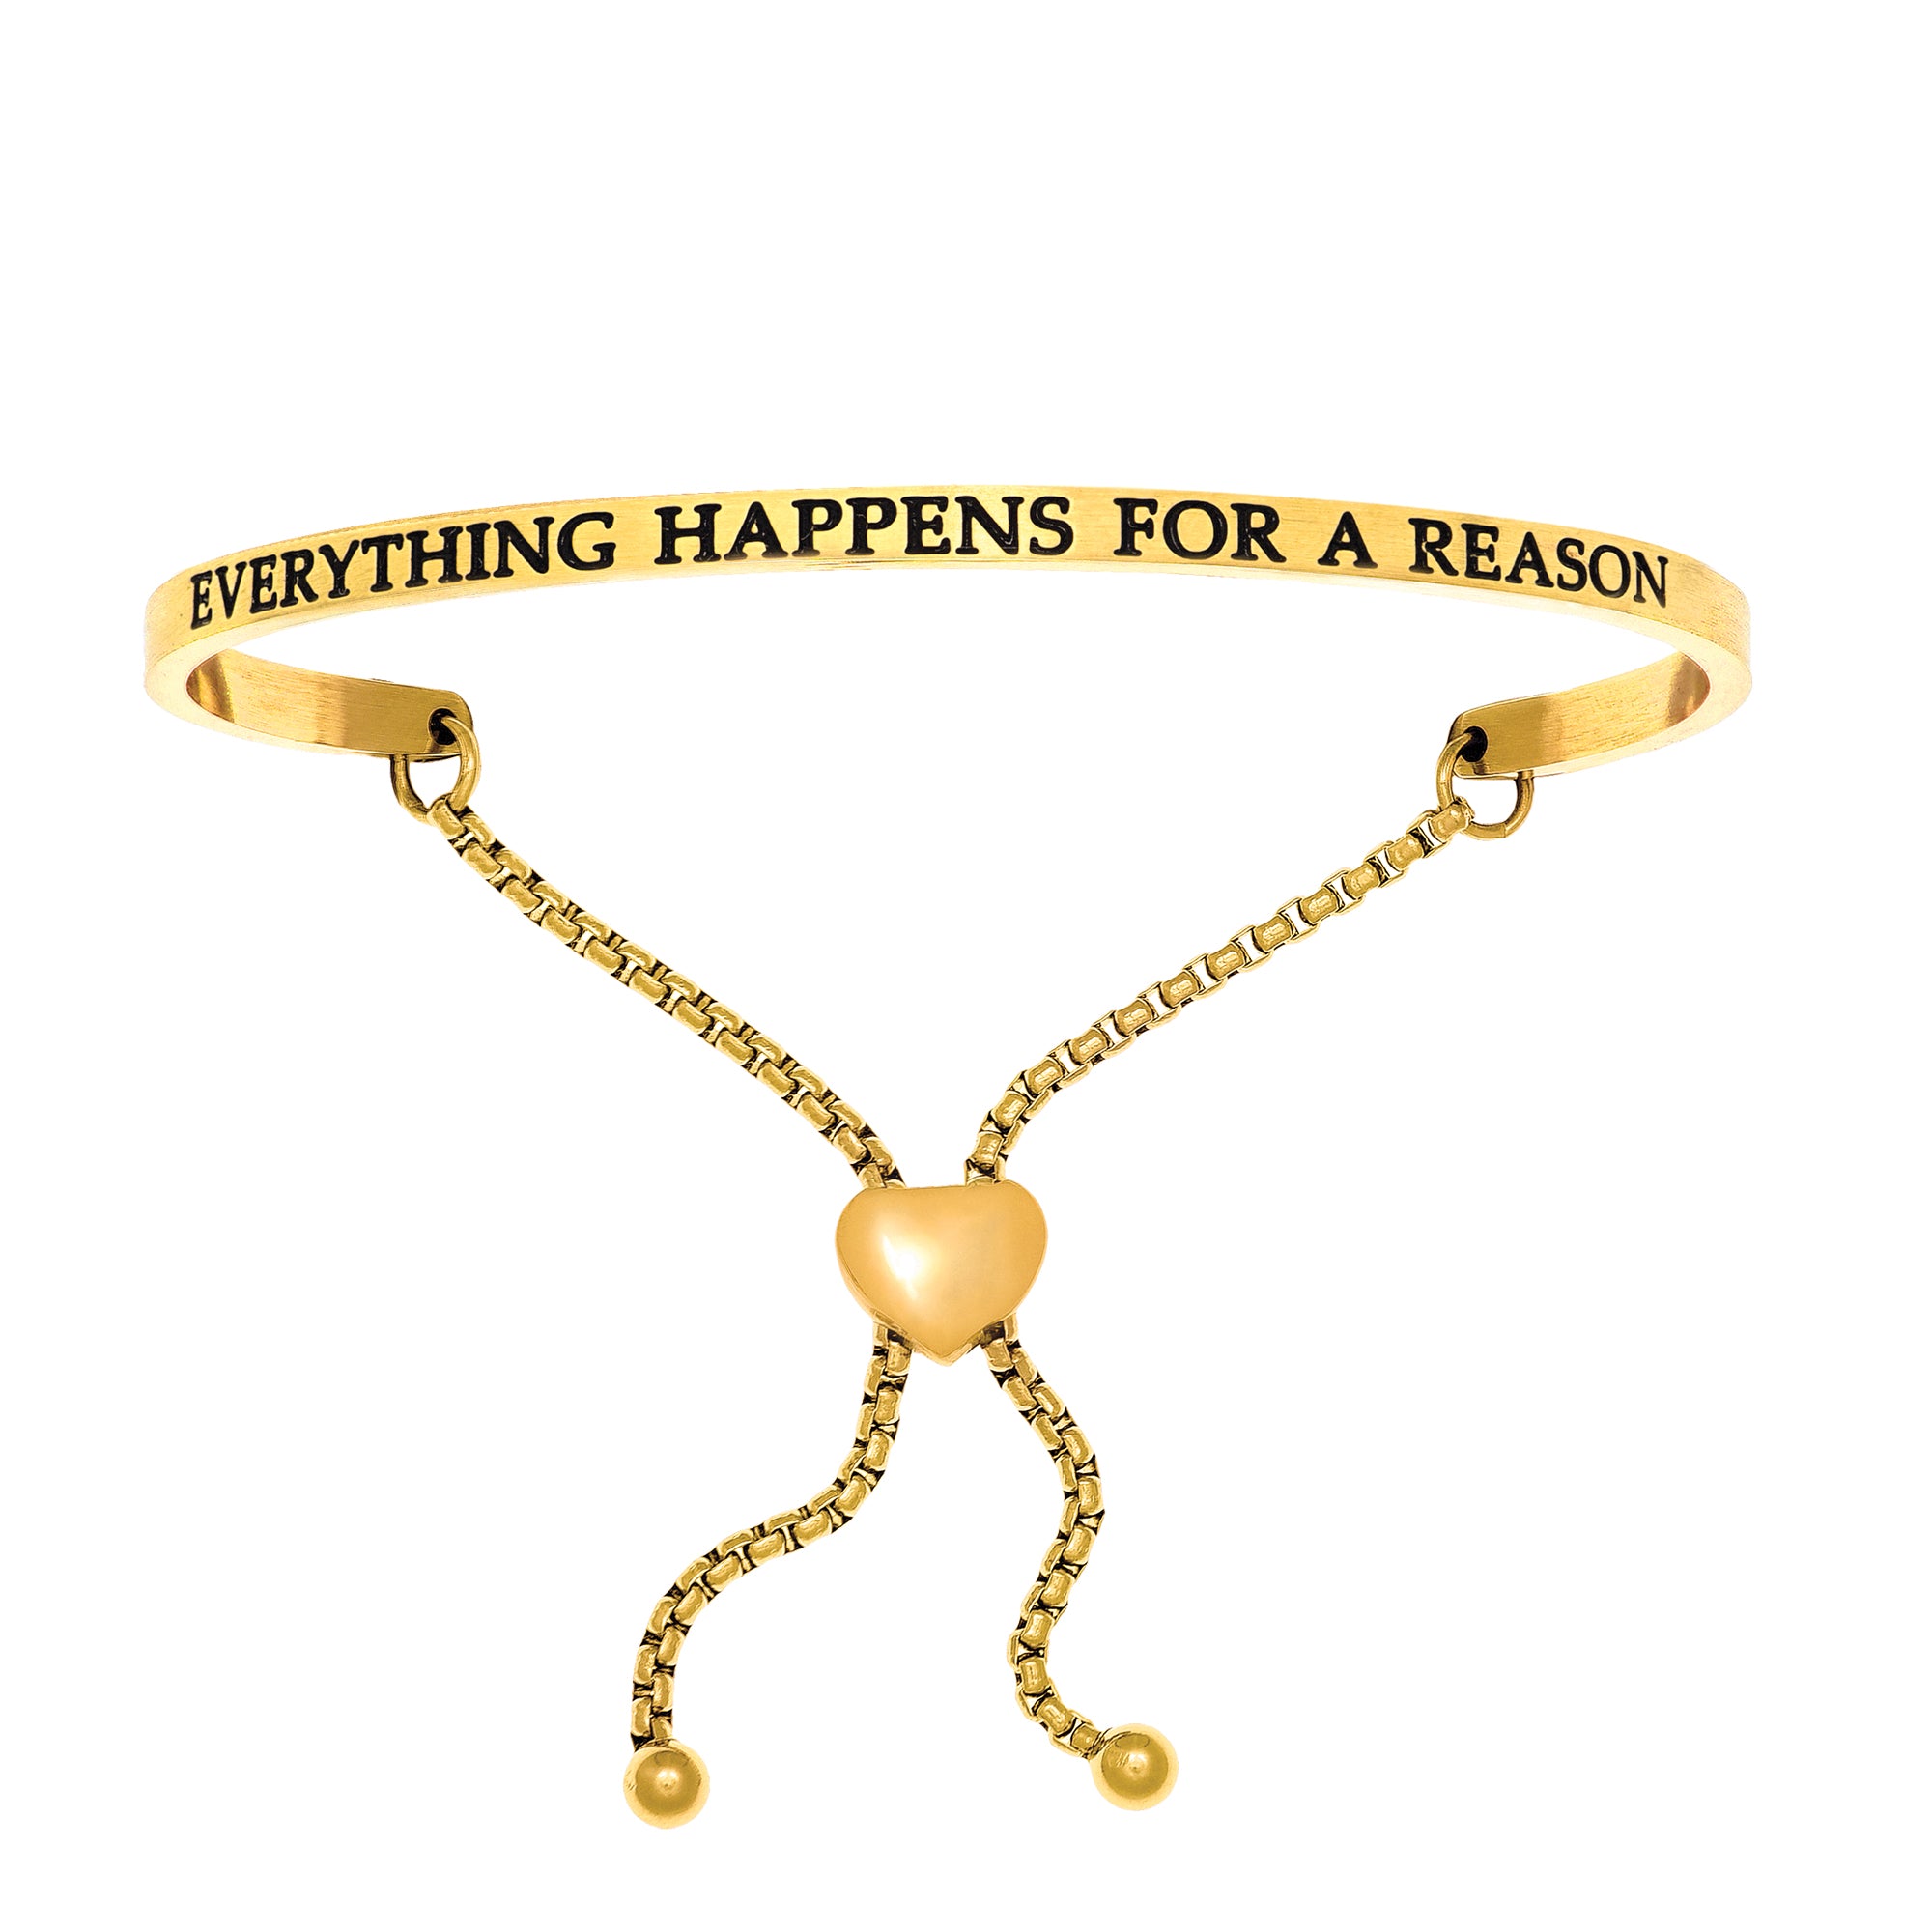 Intuitions Stainless Steel EVERYTHING HAPPENS FOR A REASON Diamond Accent Adjustable Bracelet